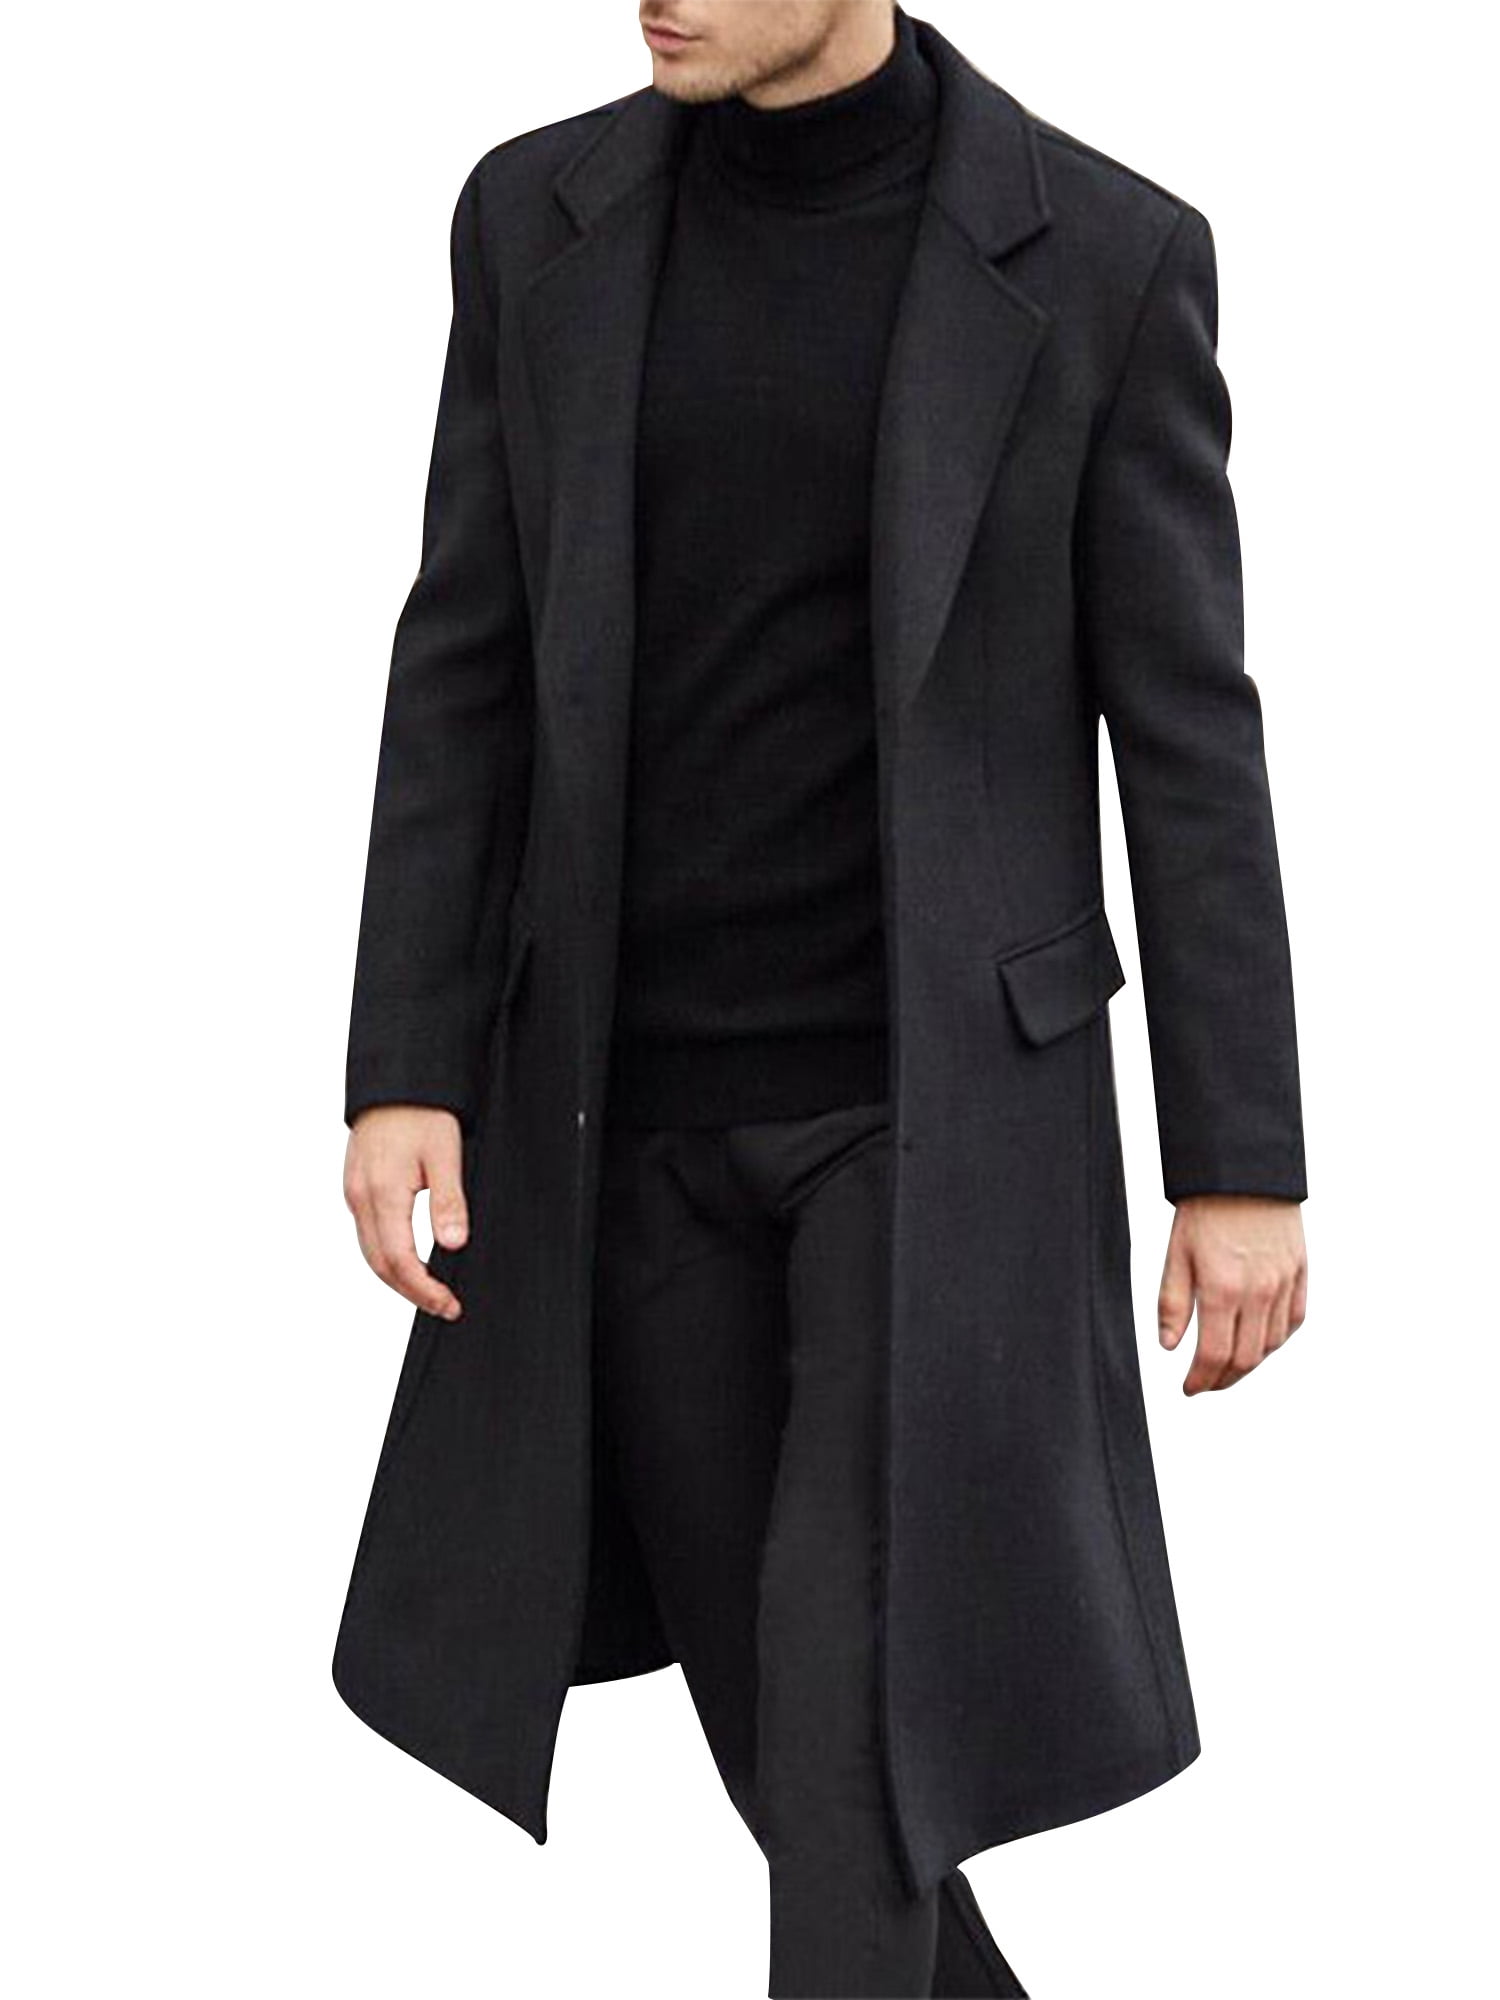 Mens Wool Coat Trench Blend Long Top Pea Coat Slim Fit Double Breasted Classic Stylish Business Overcoat